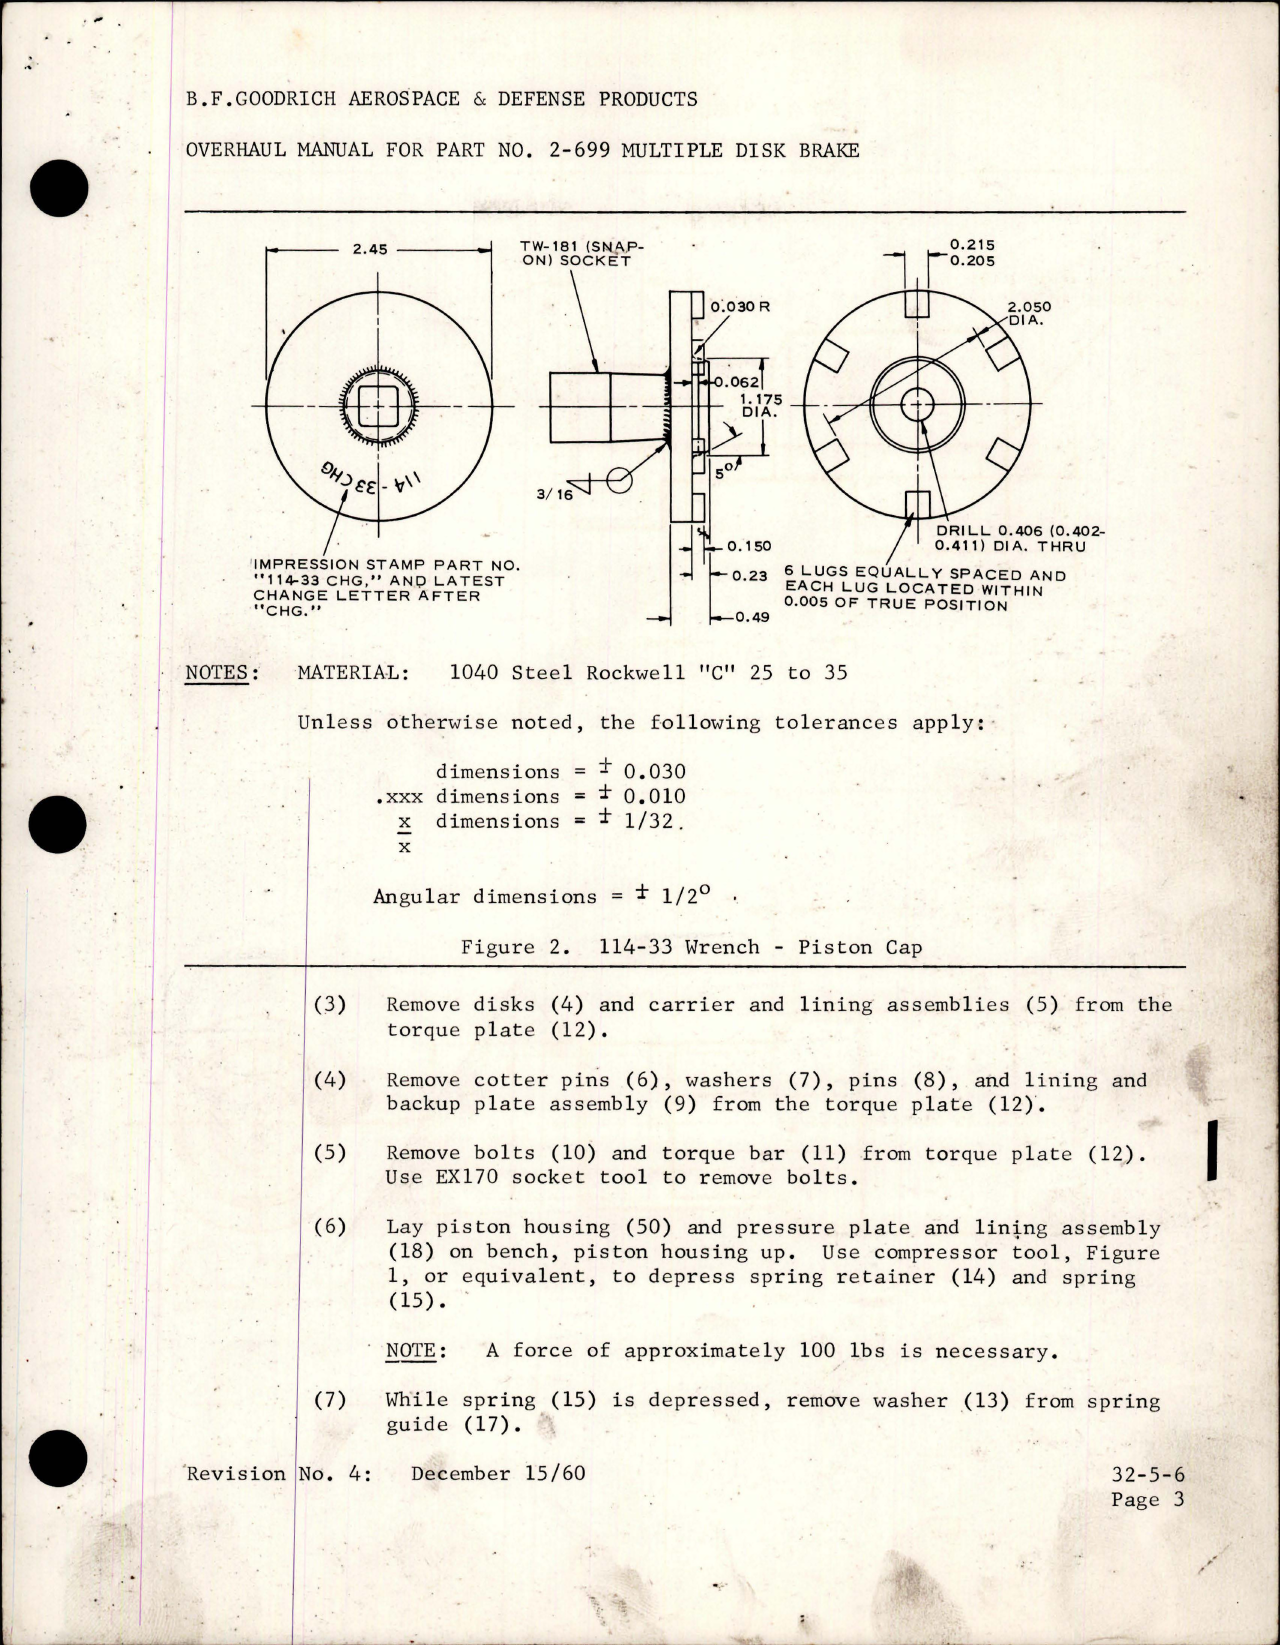 Sample page 7 from AirCorps Library document: Overhaul Manual for Multiple Disk Brake - Part 2-699 